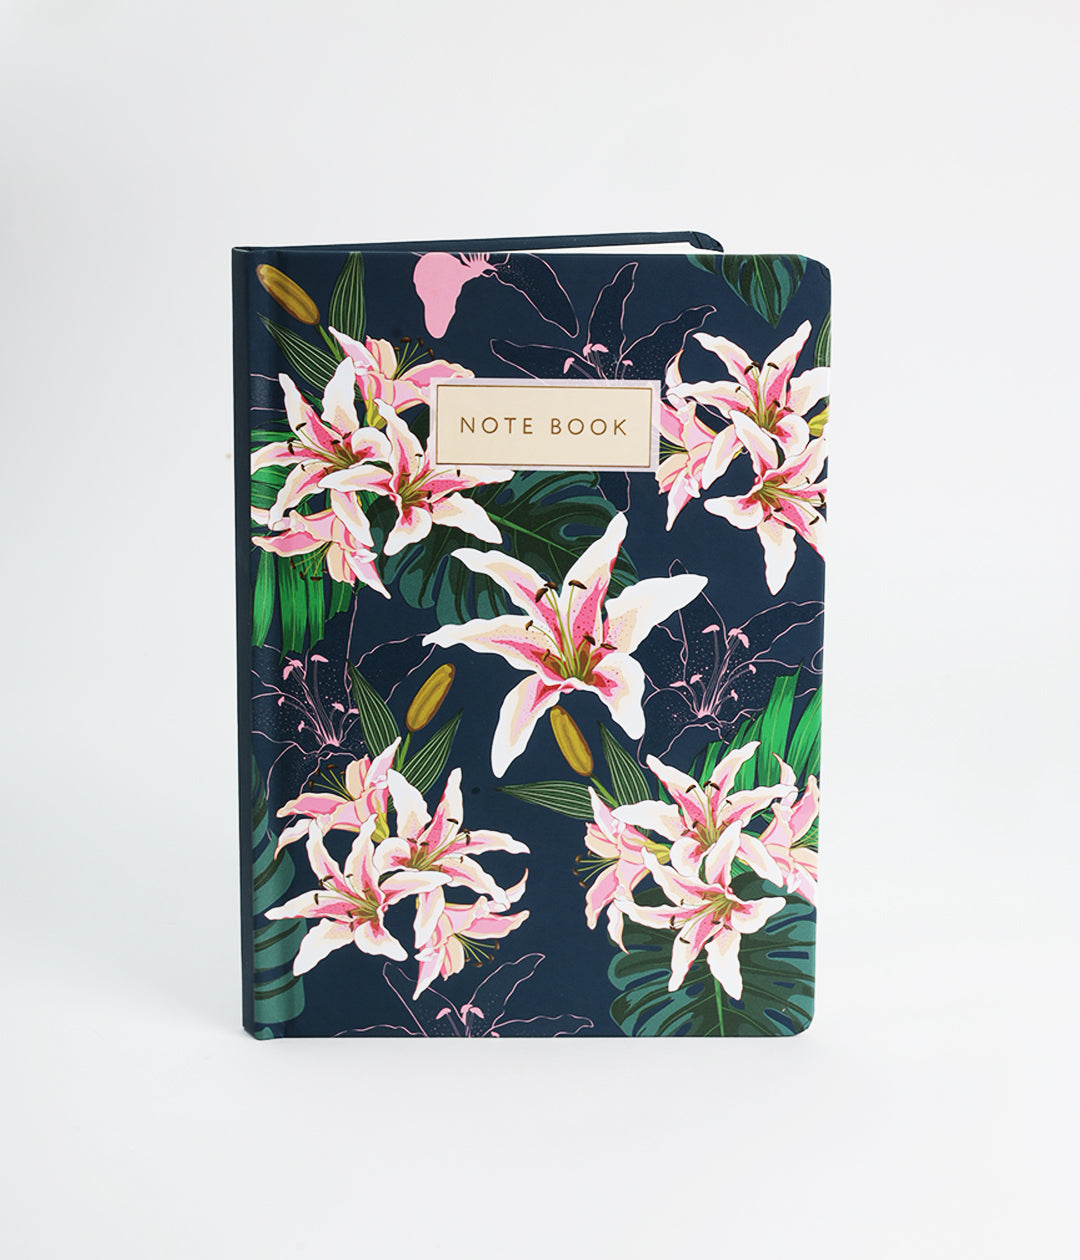 Paint Me Bloom Hardbound Notebook Journal Diary with Matt Lamination Accents